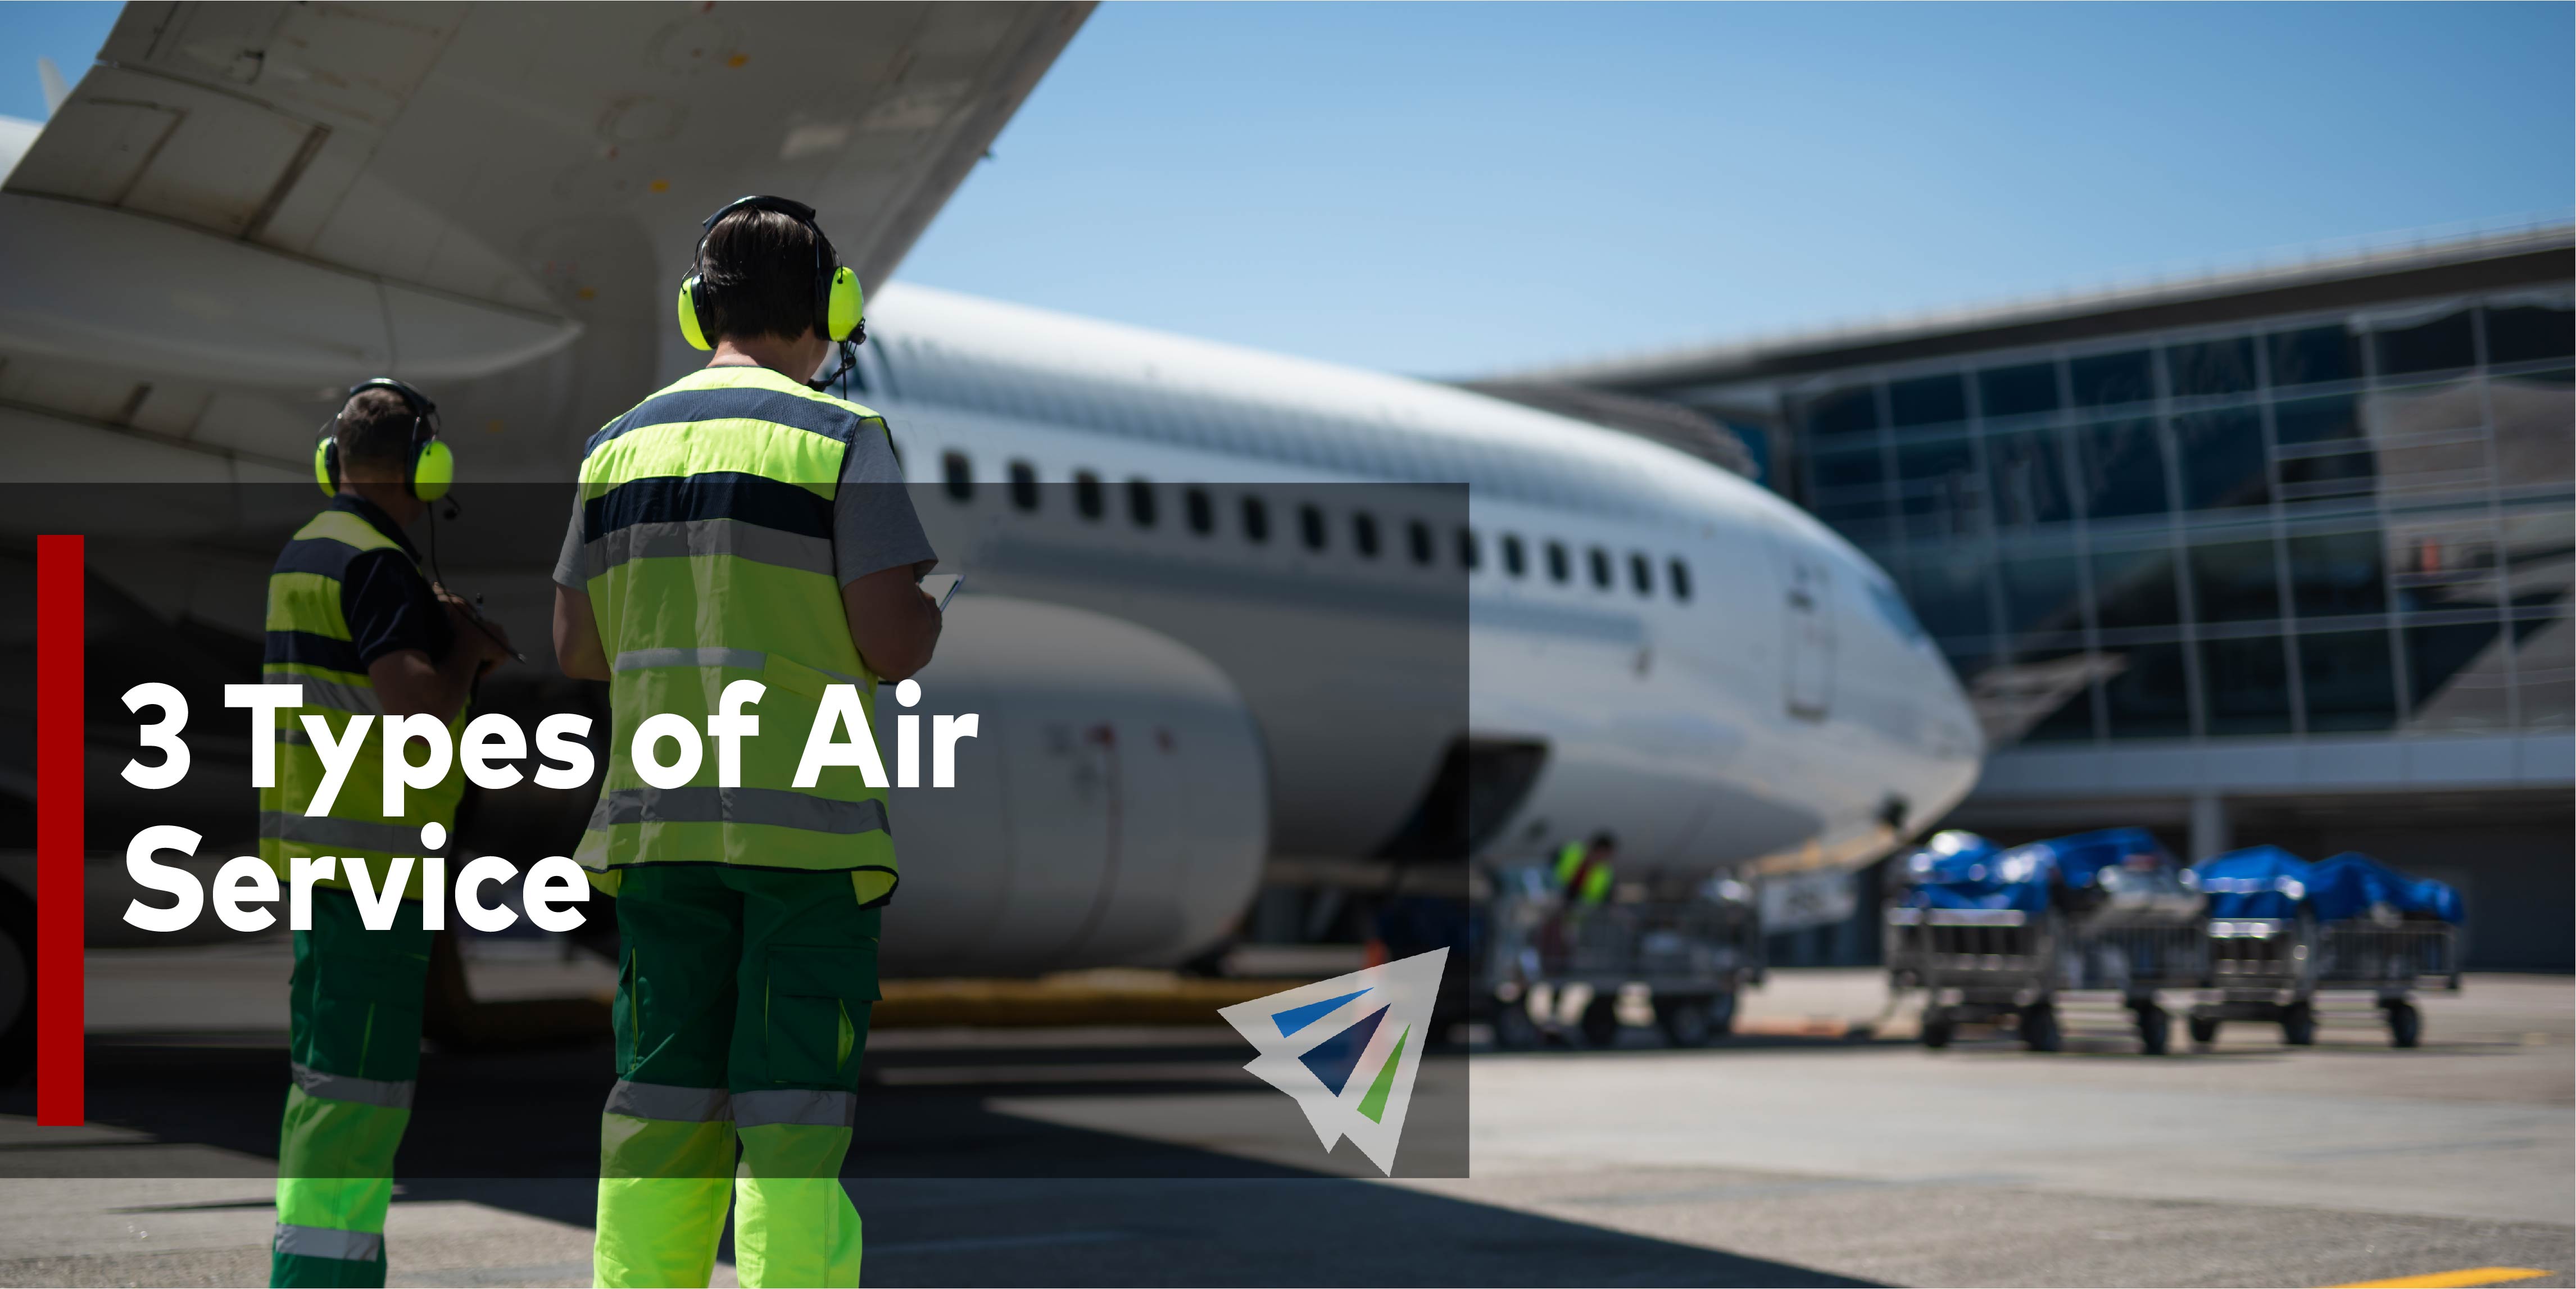 3 Types of Air Service